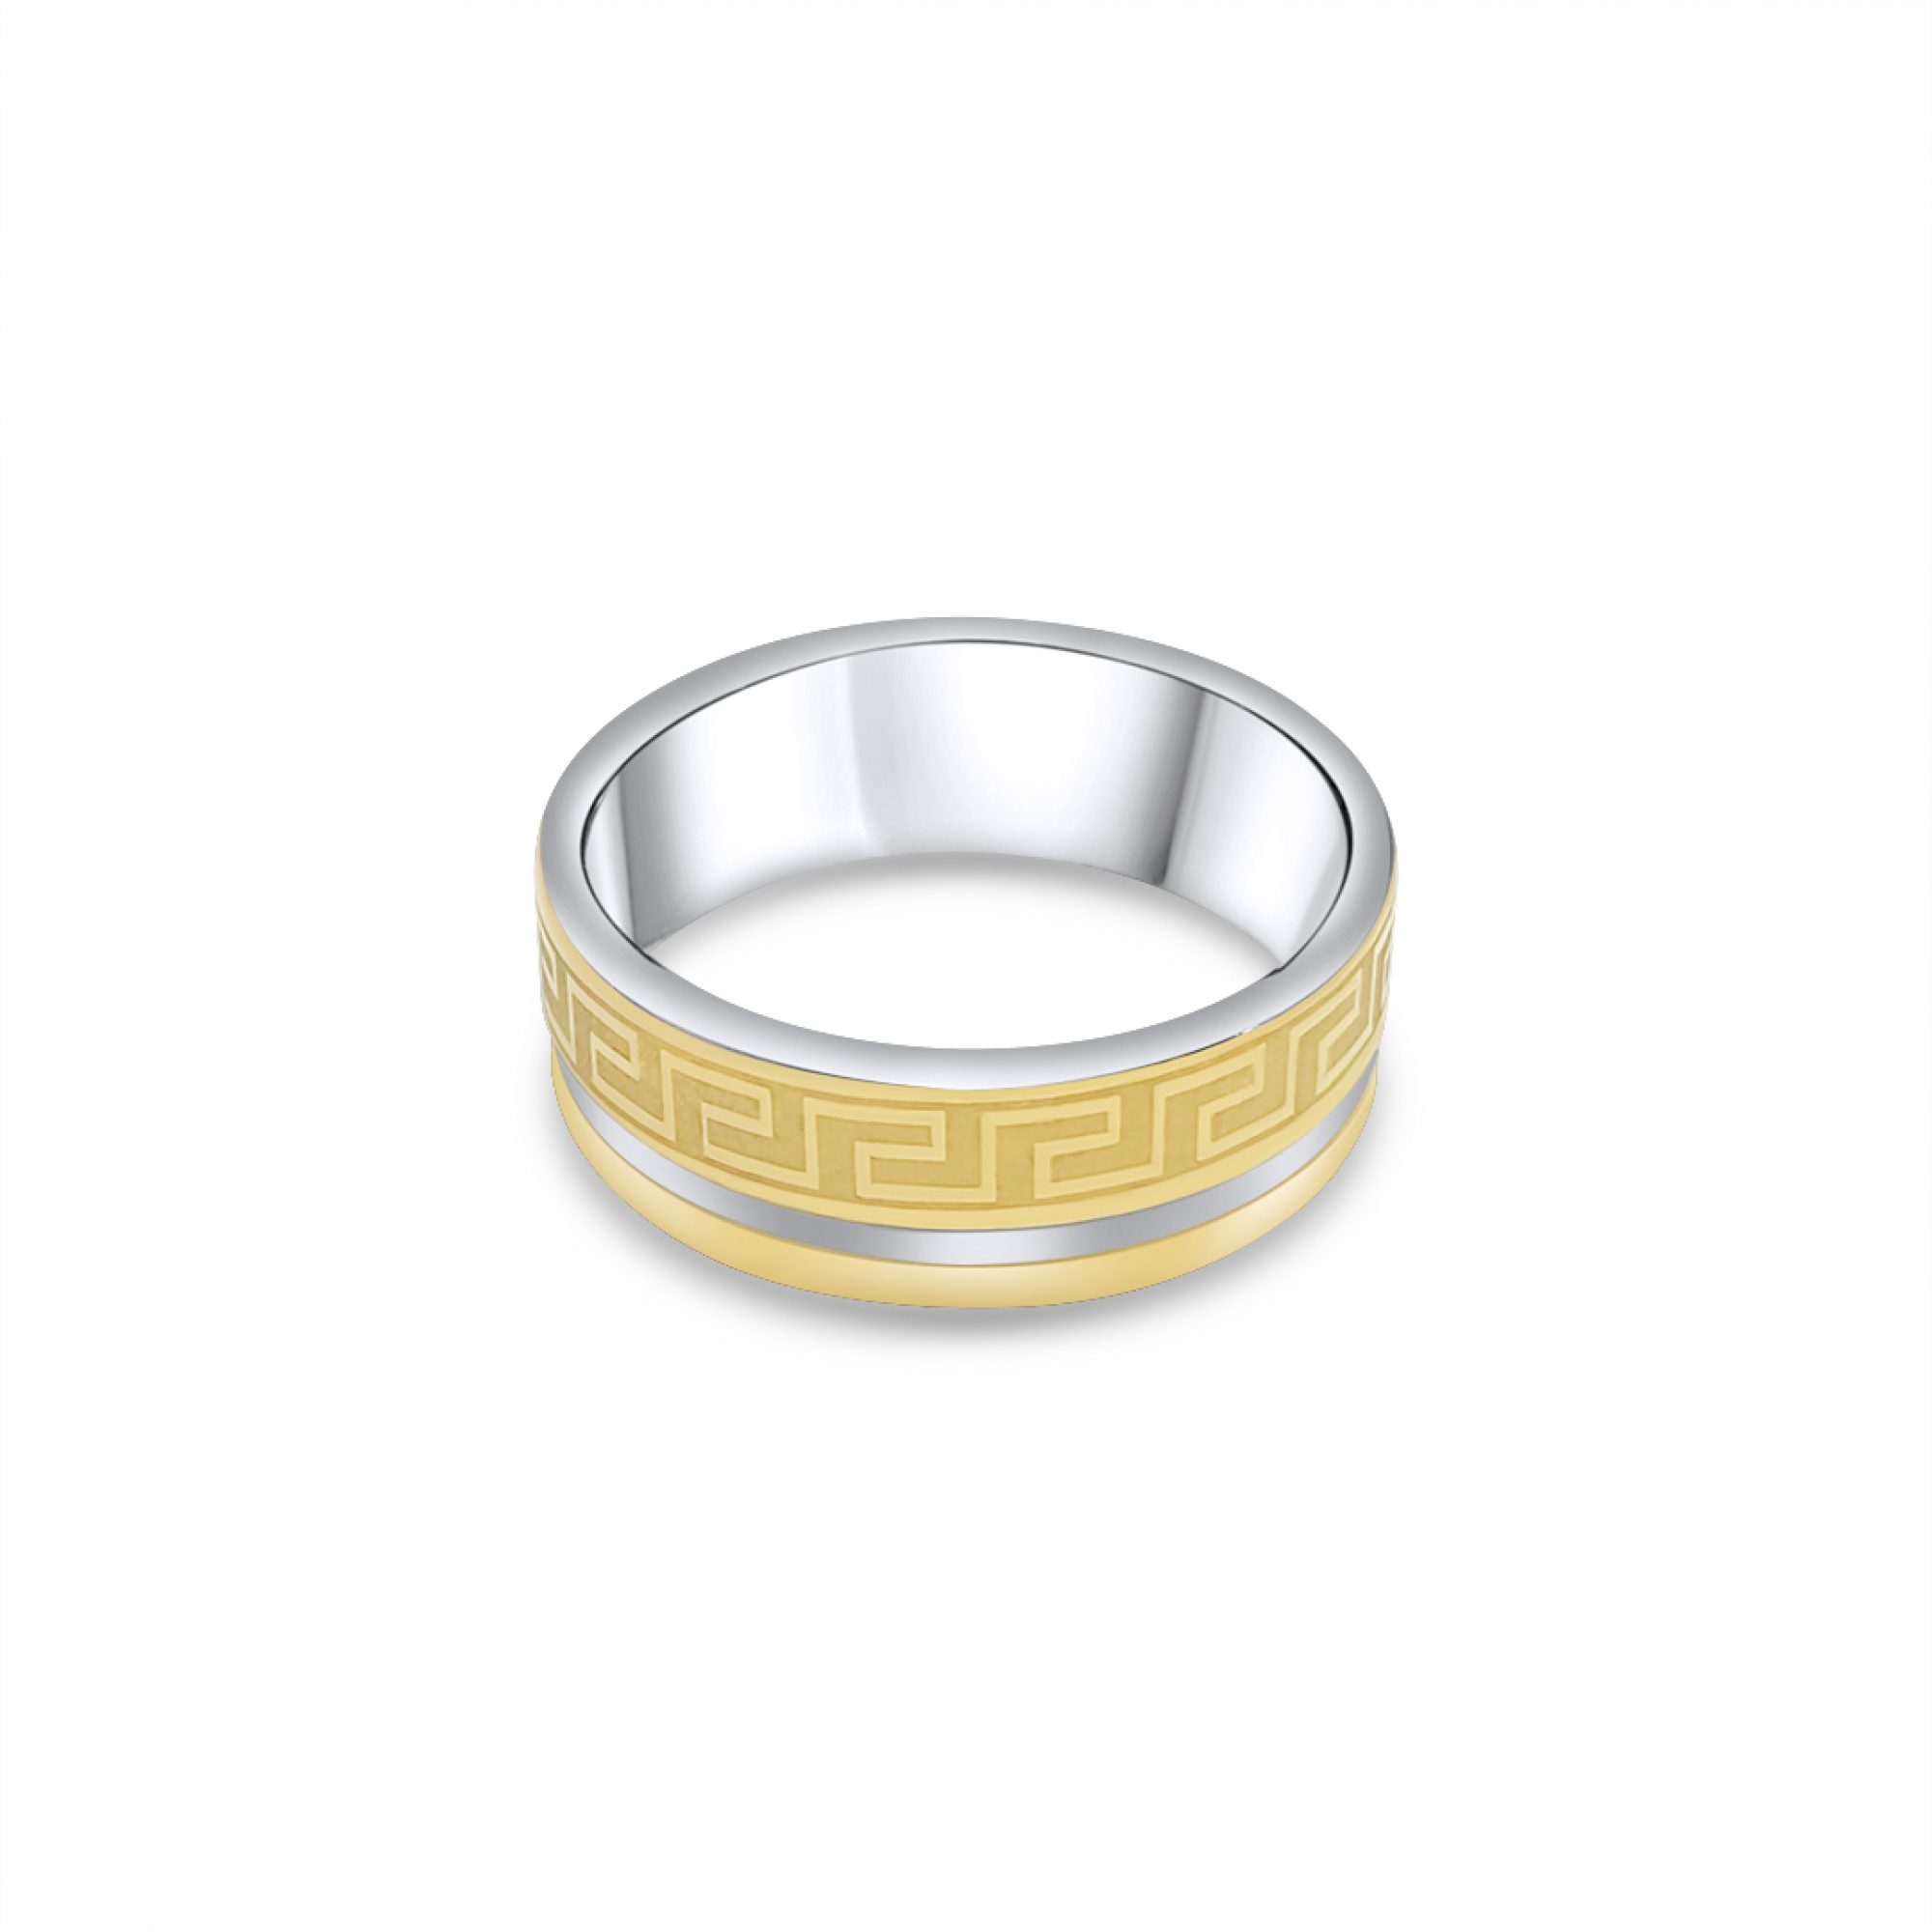 Gold plated steel ring with meander